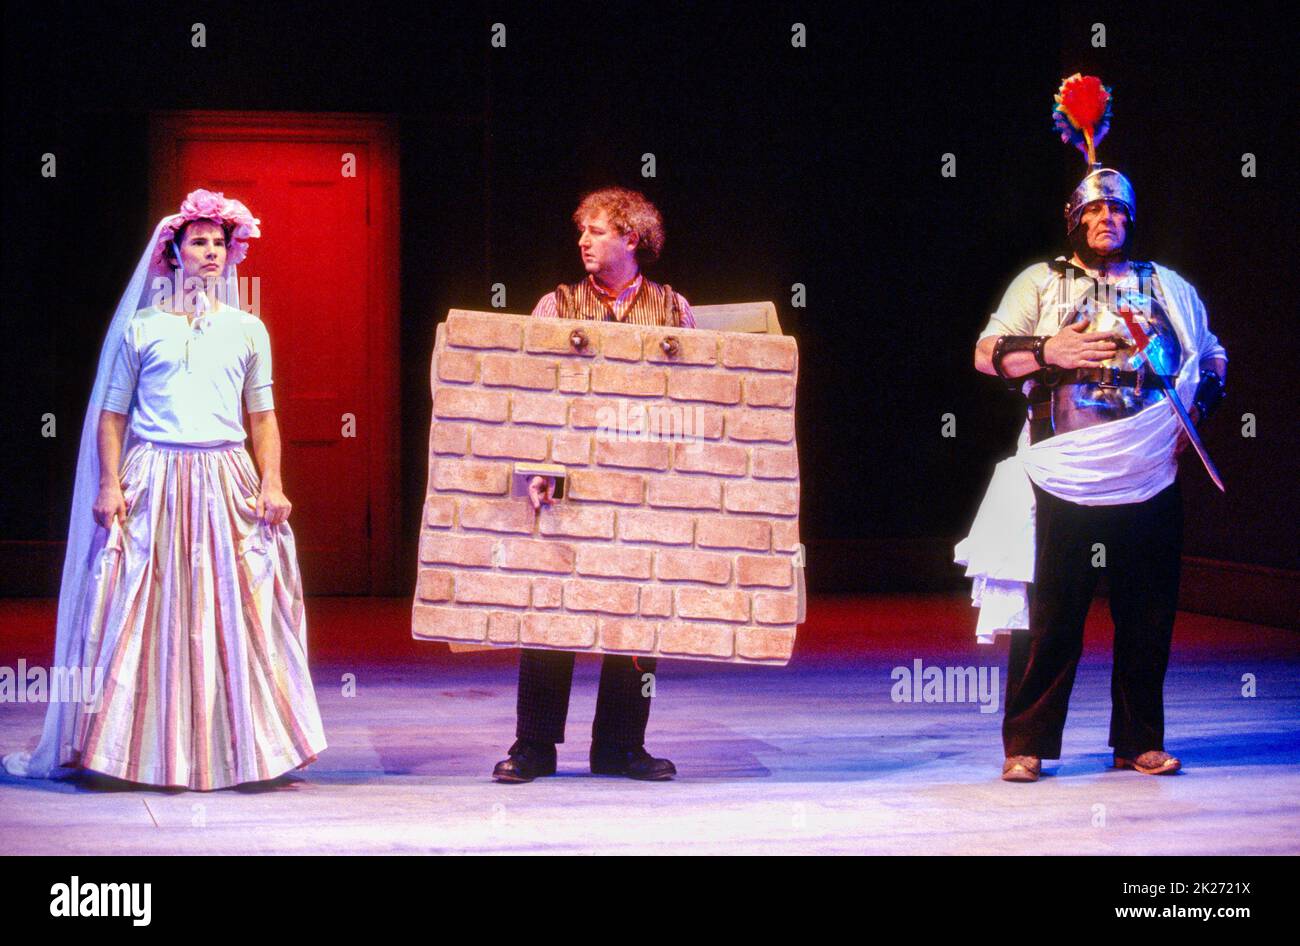 l-r: Daniel Evans (Francis Flute / Thisby), Howard Crossley (Tom Snout / Wall), Desmond Barrit (Bottom / Pyramus) in A MIDSUMMER NIGHT'S DREAM by Shakespeare at the Royal Shakespeare Company (RSC), Barbican Theatre, London EC2  25/04/1995  music: Ilona Sekacz  design: Anthony Ward  lighting: Chris Parry  movement: Sue Lefton  director: Adrian Noble Stock Photo